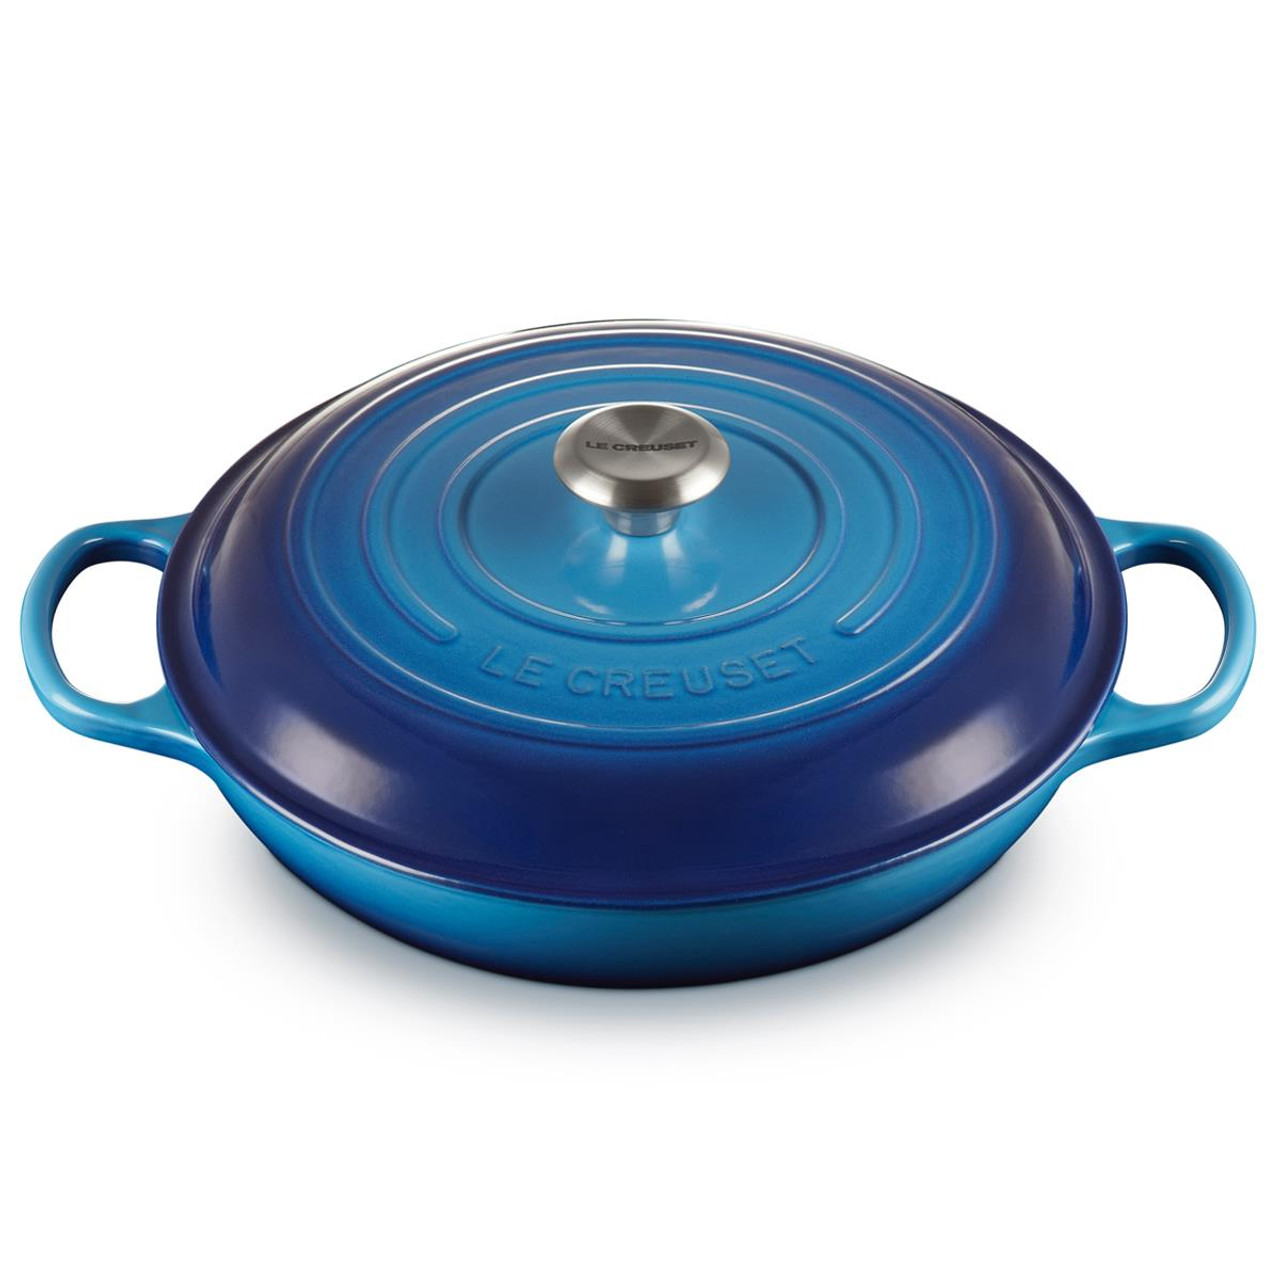 What is the Le Creuset 30cm Shallow Casserole Dish?